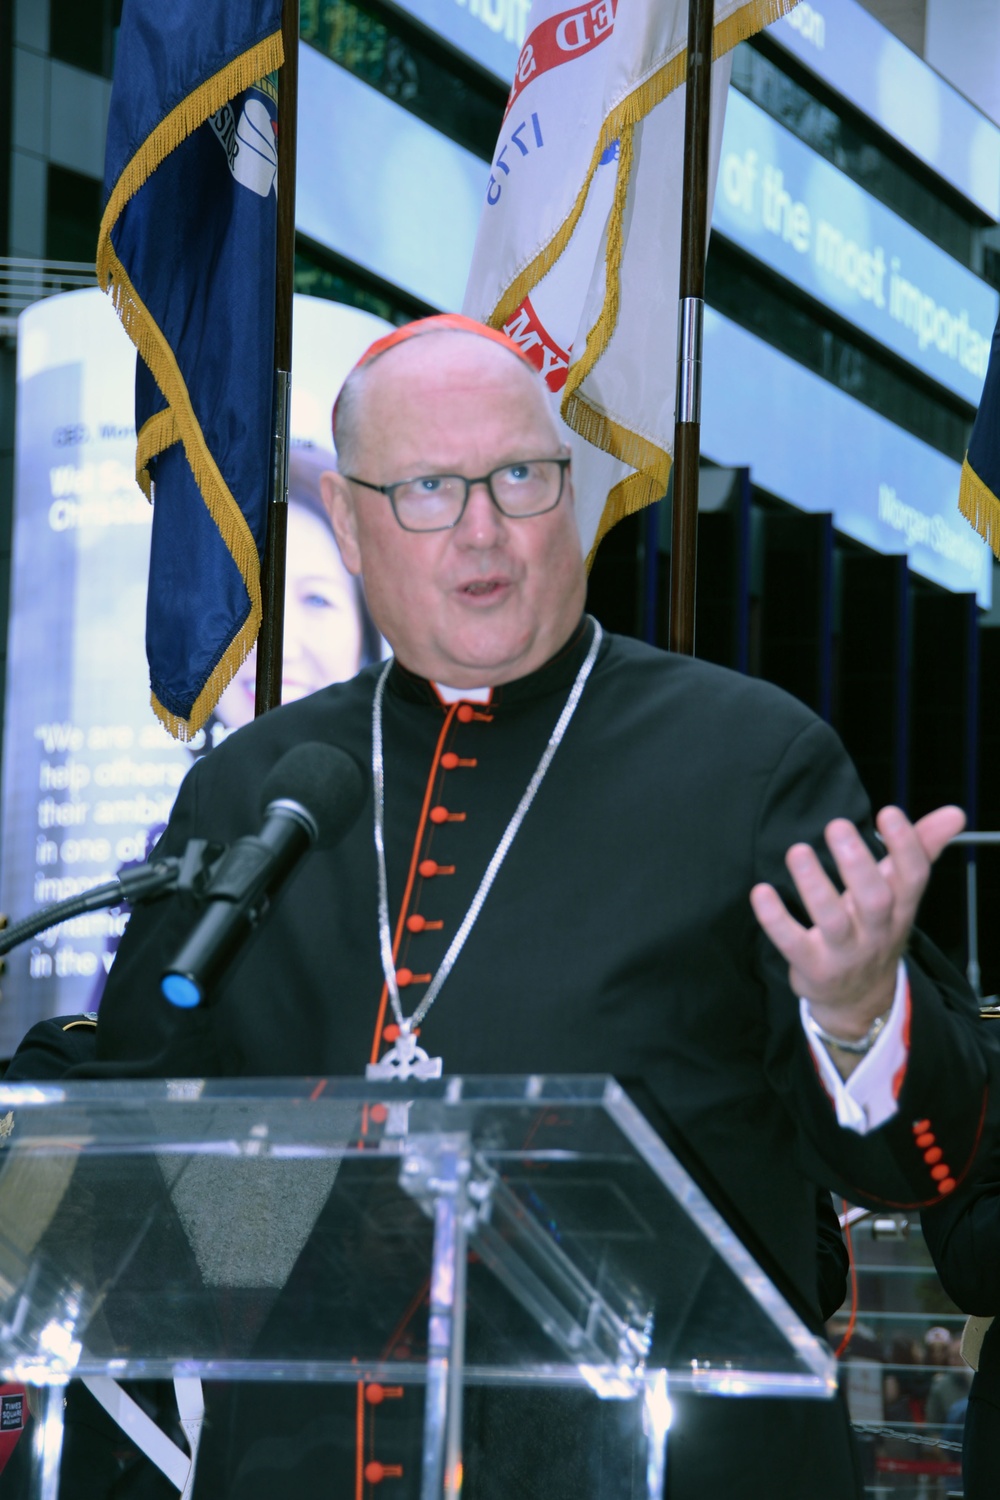 National Guard Chaplaincy Celebrates Fighting Father Duffy in NYC